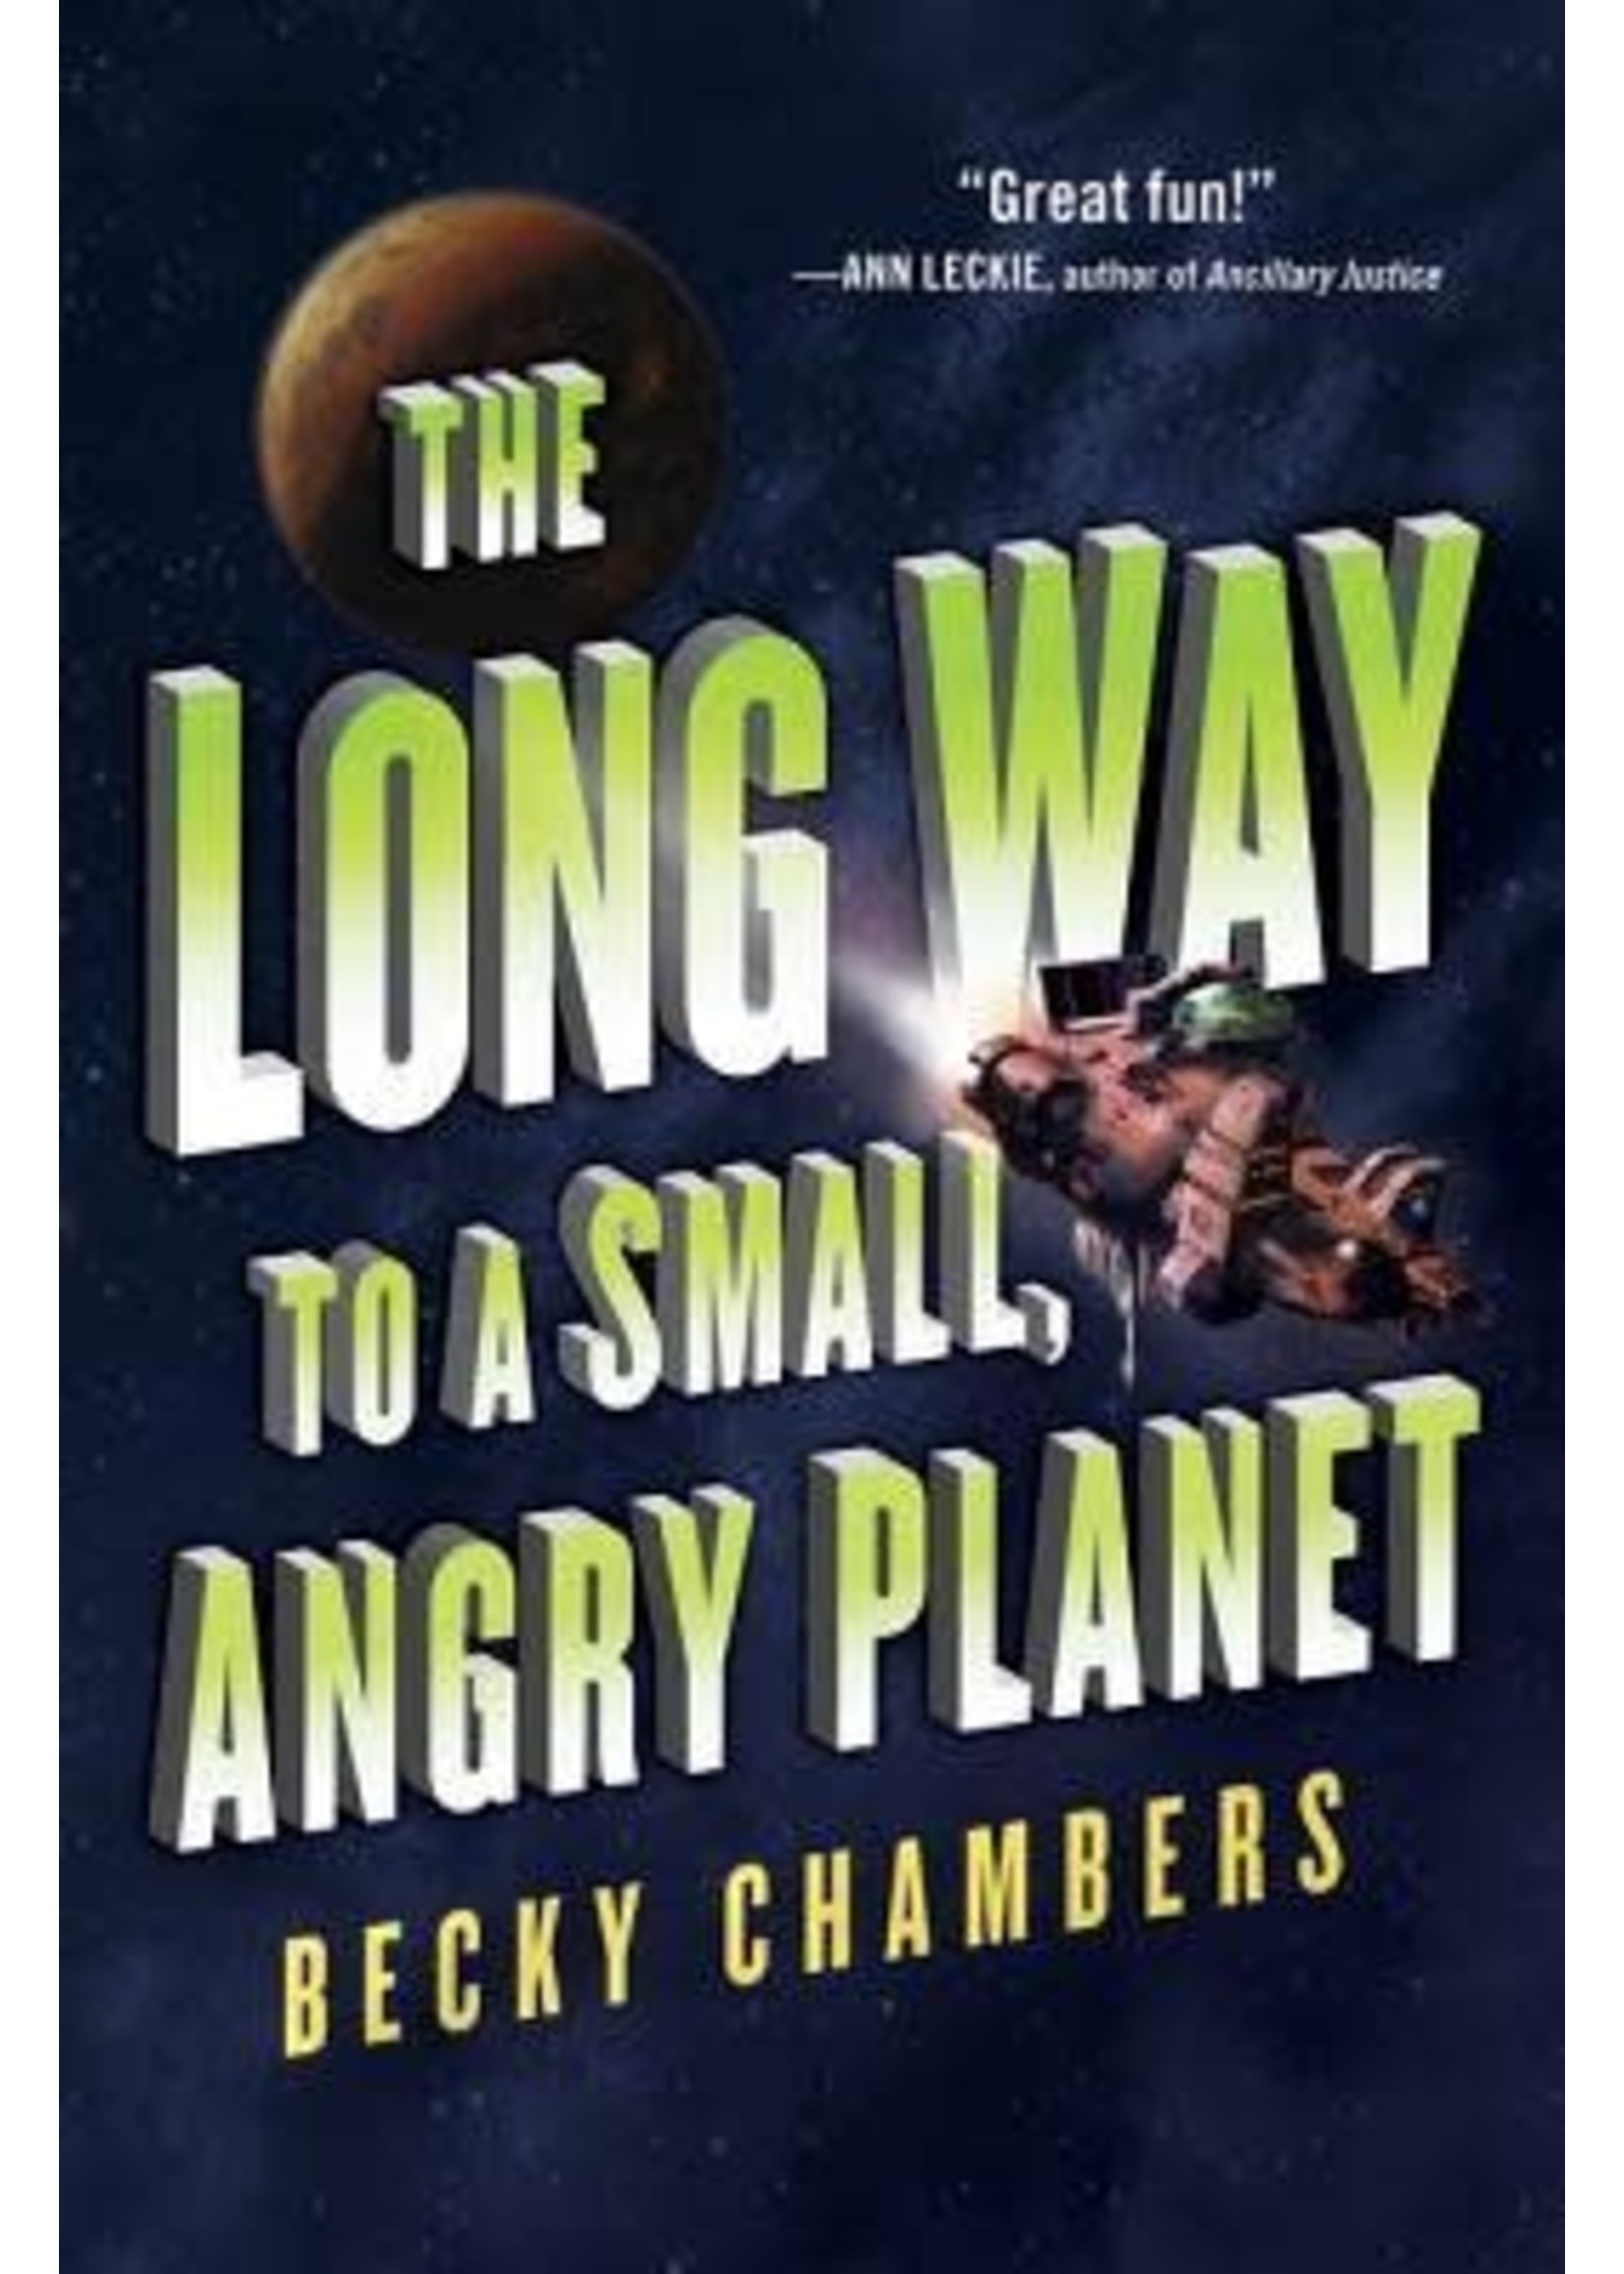 The Long Way to a Small, Angry Planet (Wayfarers #1) by Becky Chambers